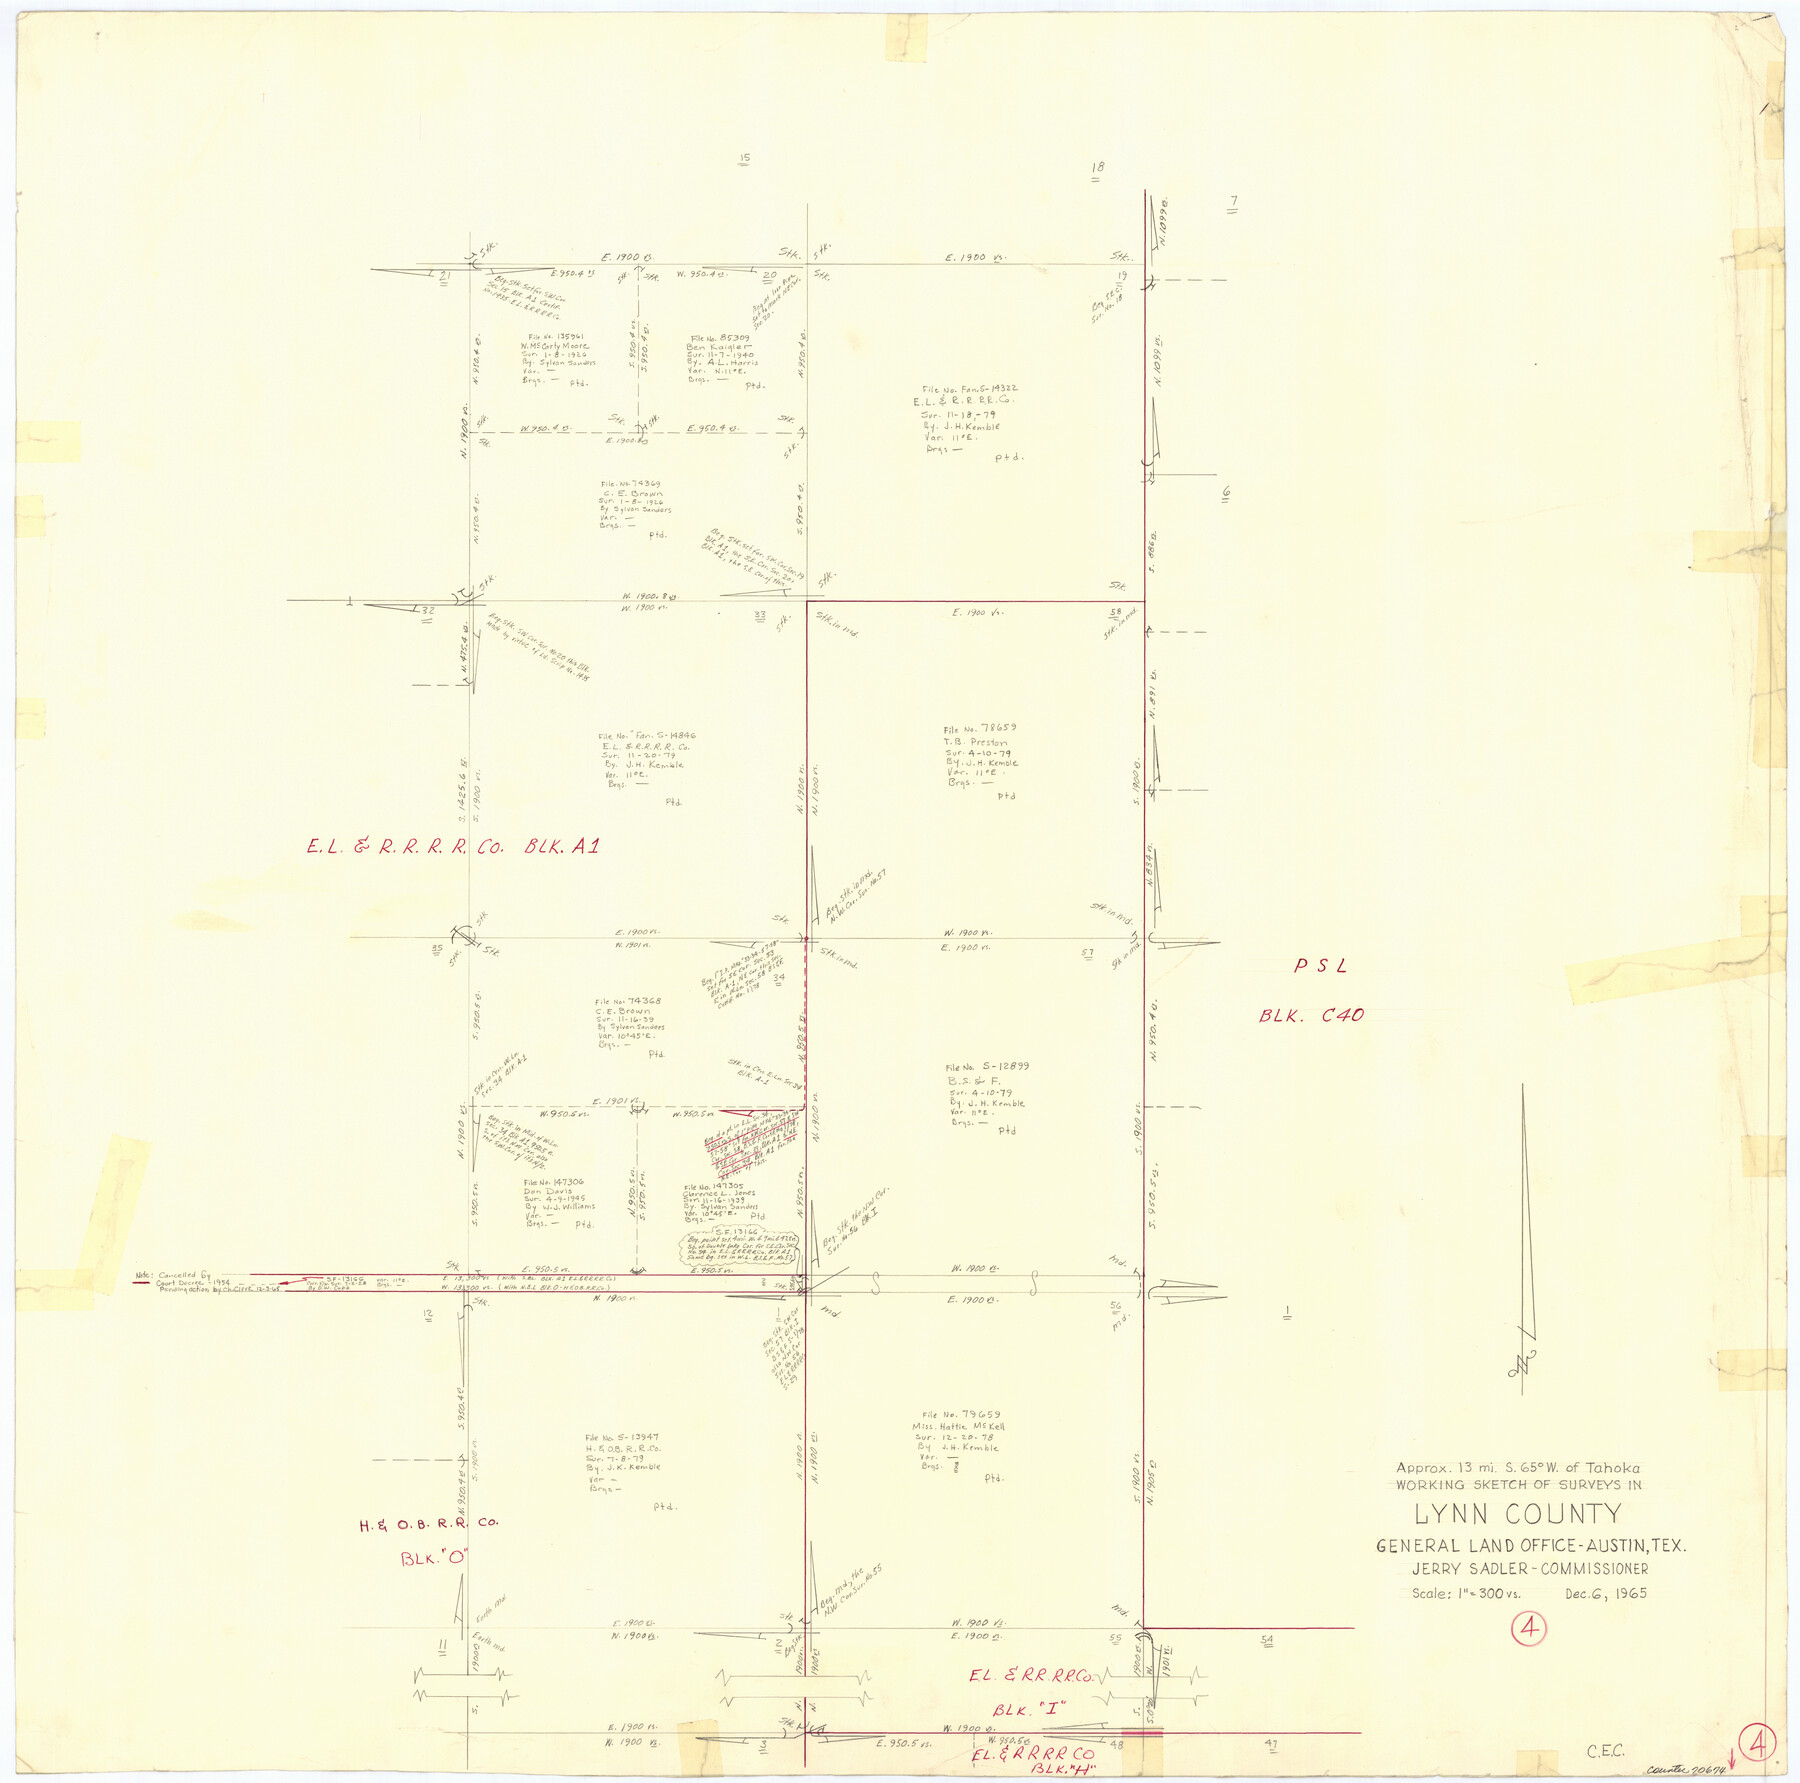 70674, Lynn County Working Sketch 4, General Map Collection